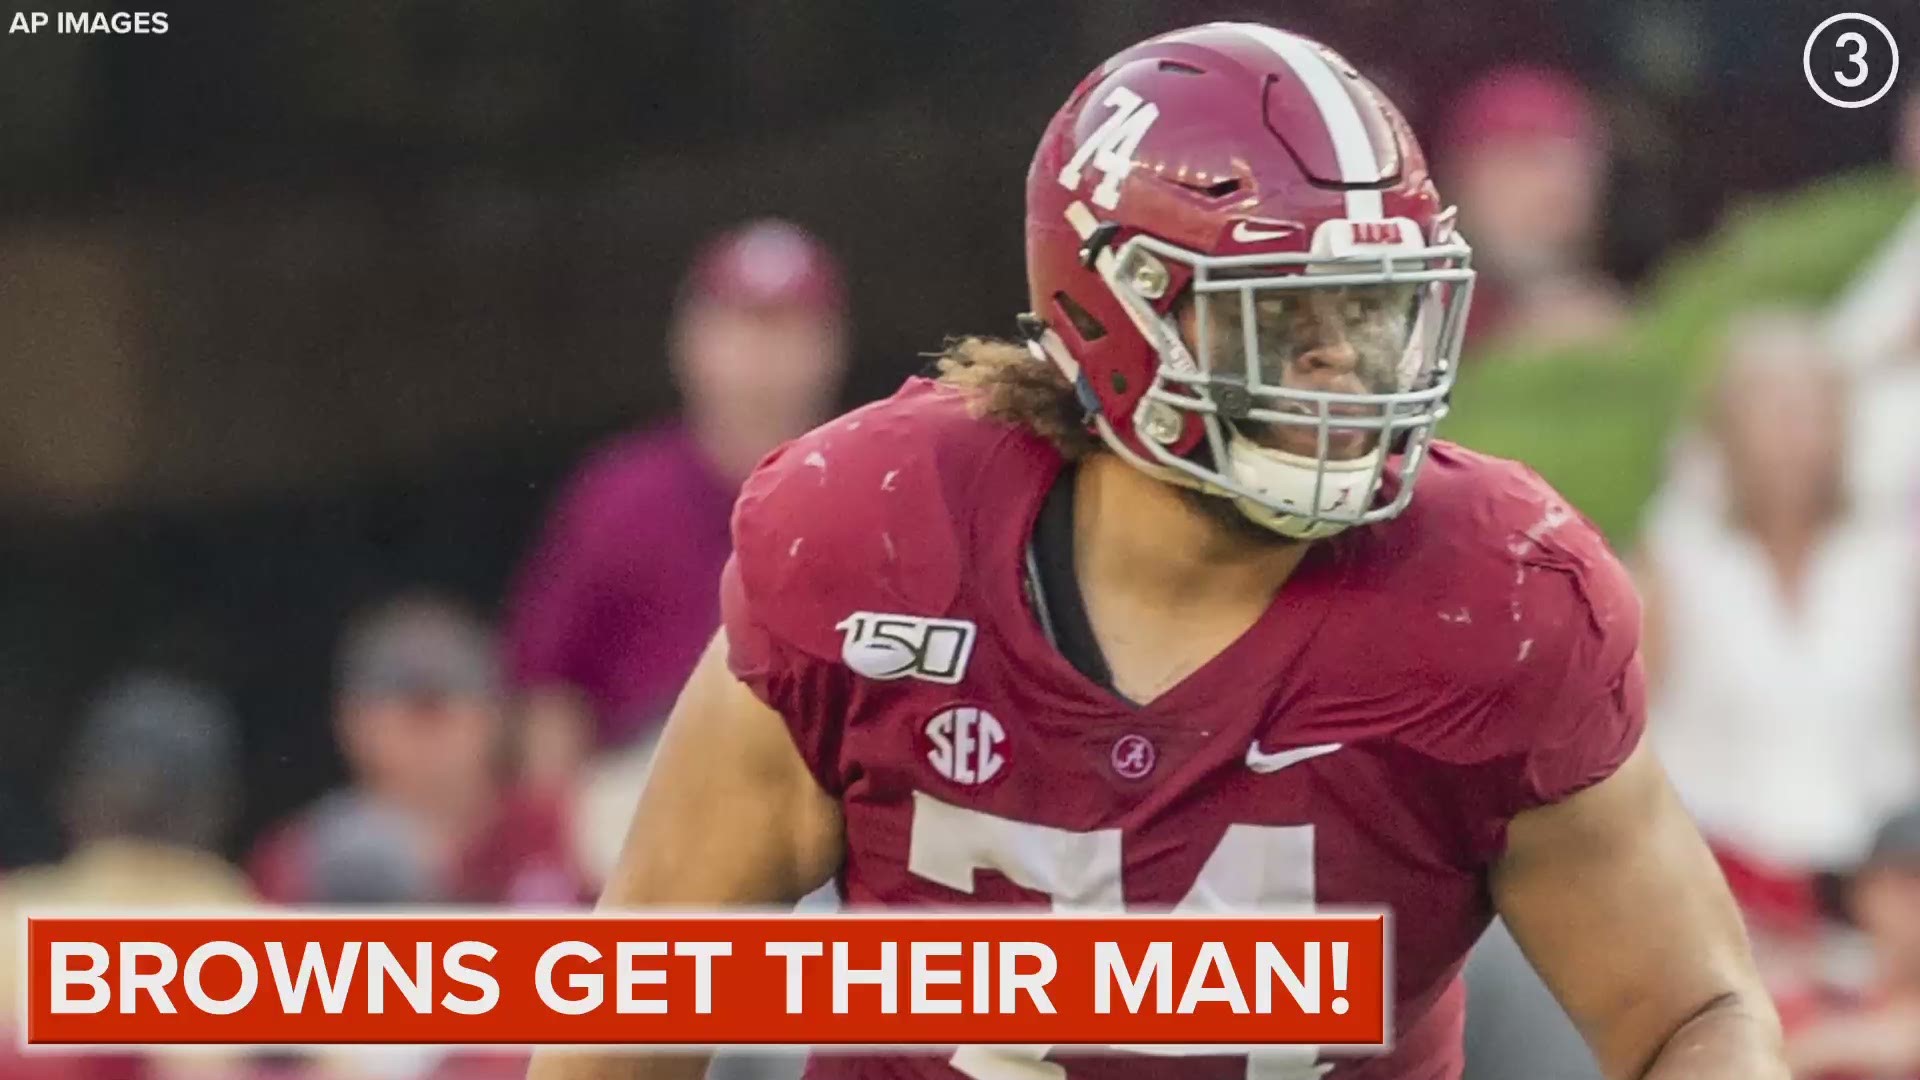 With the No. 10 pick in the 2020 NFL Draft, the Cleveland Browns selected Alabama offensive tackle Jedrick Wills Jr.